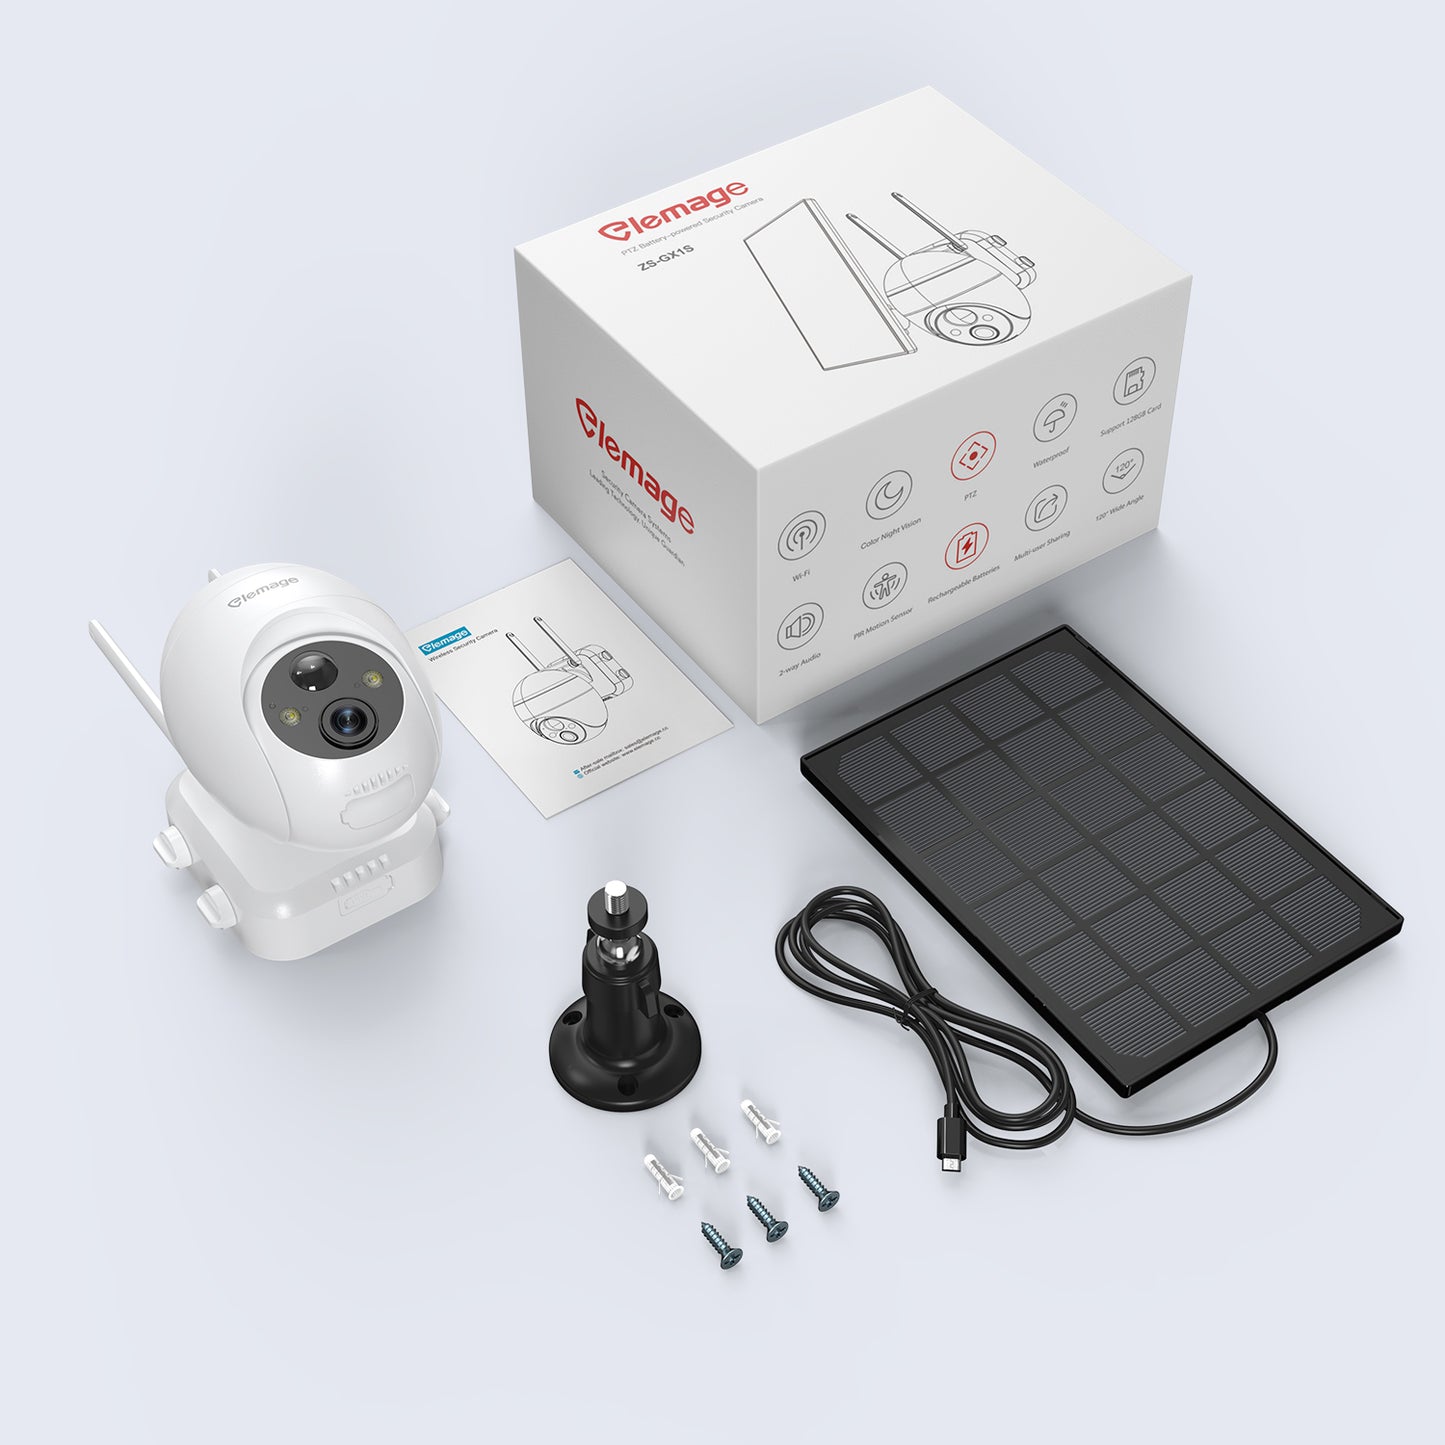 Elemage Solar Powered PTZ Security Camera (ZS-GX1S)